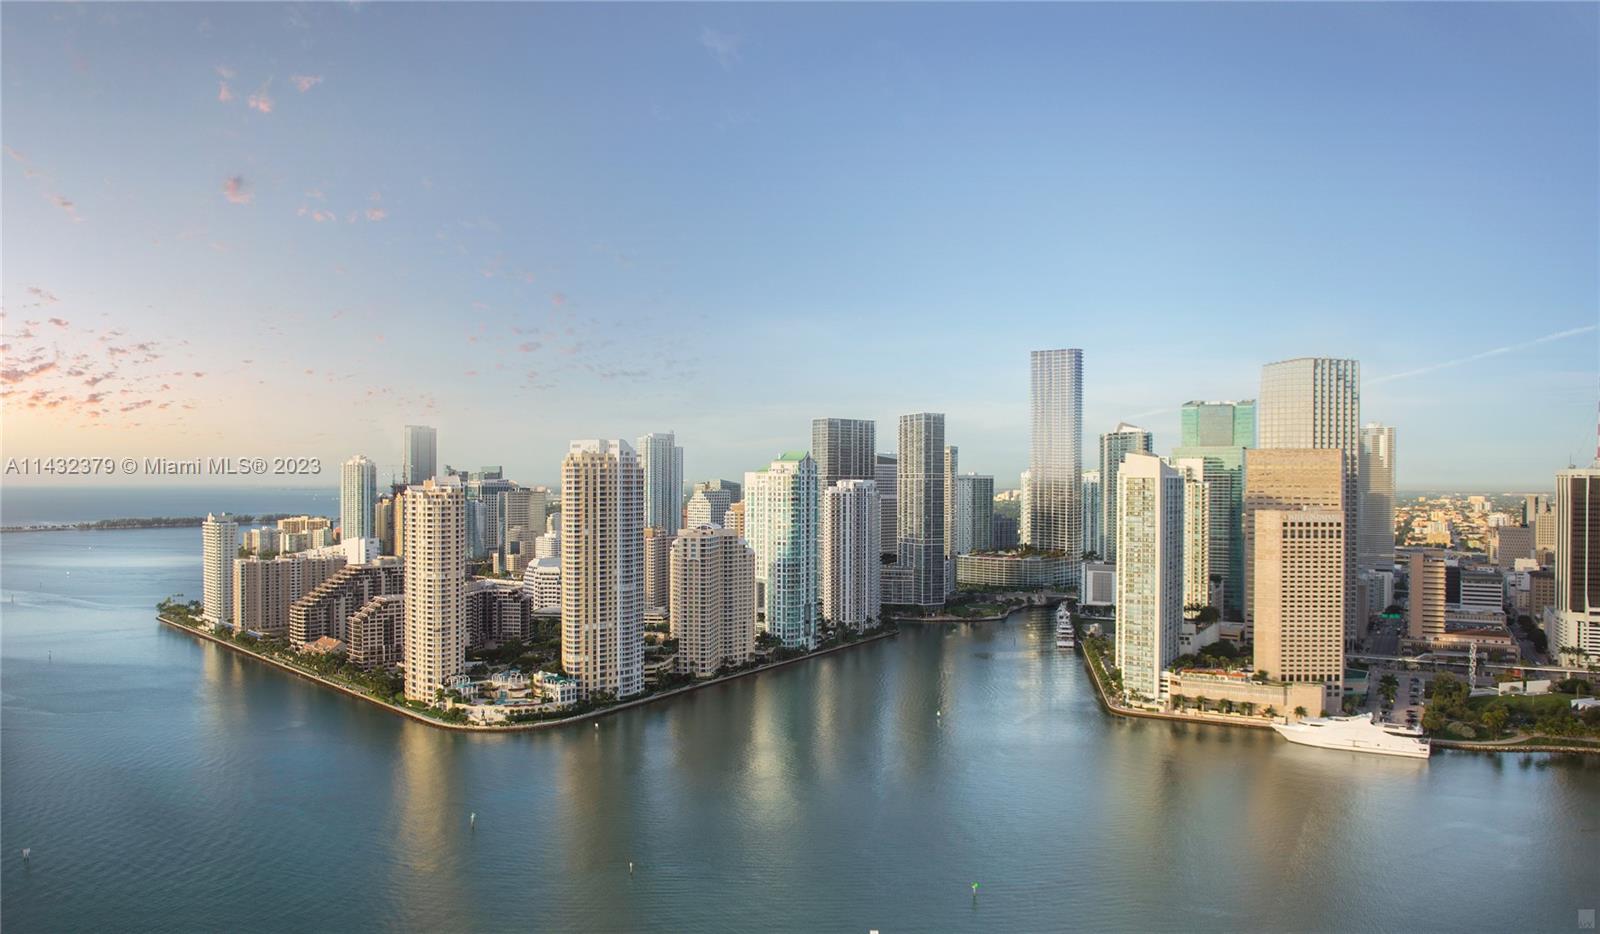 4 BD / 4.5 BA with 3,070 SF  +627 SF OF TERRACE. BACCARAT RESIDENCES MIAMI, THE MOST ANTICIPATED LUXURY HIGHRISE IN BRICKELL, OFFERING THIS BEAUTIFUL NE CORNER (THE PREMIUM LINE), EXPERTLY DESIGNED WITH BESPOKE INTERIORS IN THIS FLOW-THROUGH RESIDENCE WITH INFINITE VIEWS OF BISCAYNE BAY, CITY LIGHTS AND THE MIAMI RIVER, DEEP TERRACES, 10 FT. CEILINGS, HIGH END FLOORING, ITALIAN KITCHEN CABINETS, SUB-ZERO/WOLF APPLIANCES, AND MUCH MORE.   ELEGANT LOBBY, CAFE, ART GALLERY, WINE CELLAR, MULTIPLE EVENT ROOMS, PRIVATE MARINA, BOARDWALK, BAYFRONT POOL DECK, AND MUCH MORE.   PRE-CONSTRUCTION OFFERING - DELIVERY 2026.